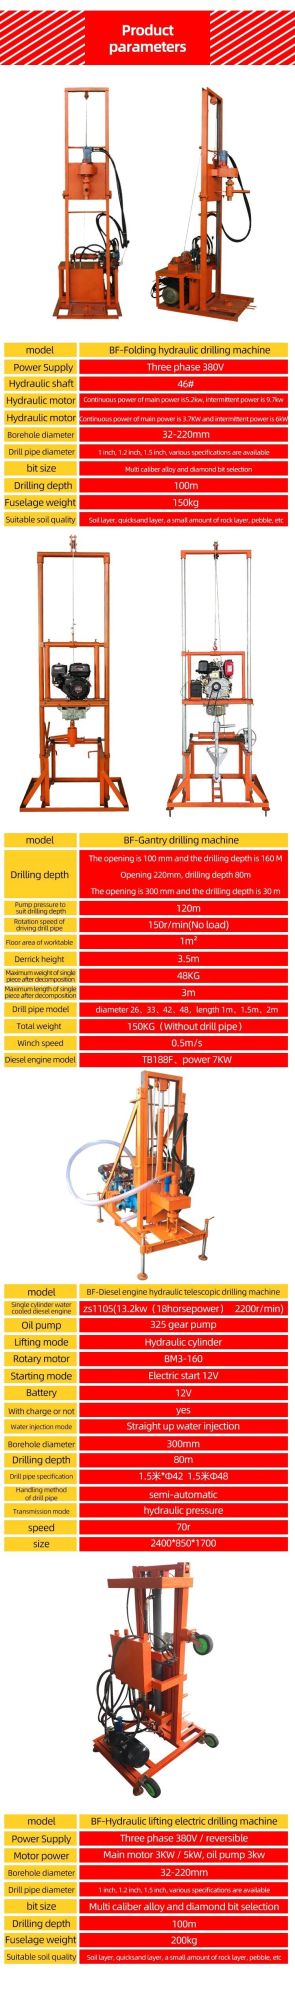 100m Small Portable Diesel Hydraulic Water Well Rotary Drilling Rig /Borehole Water Well Drilling Machine